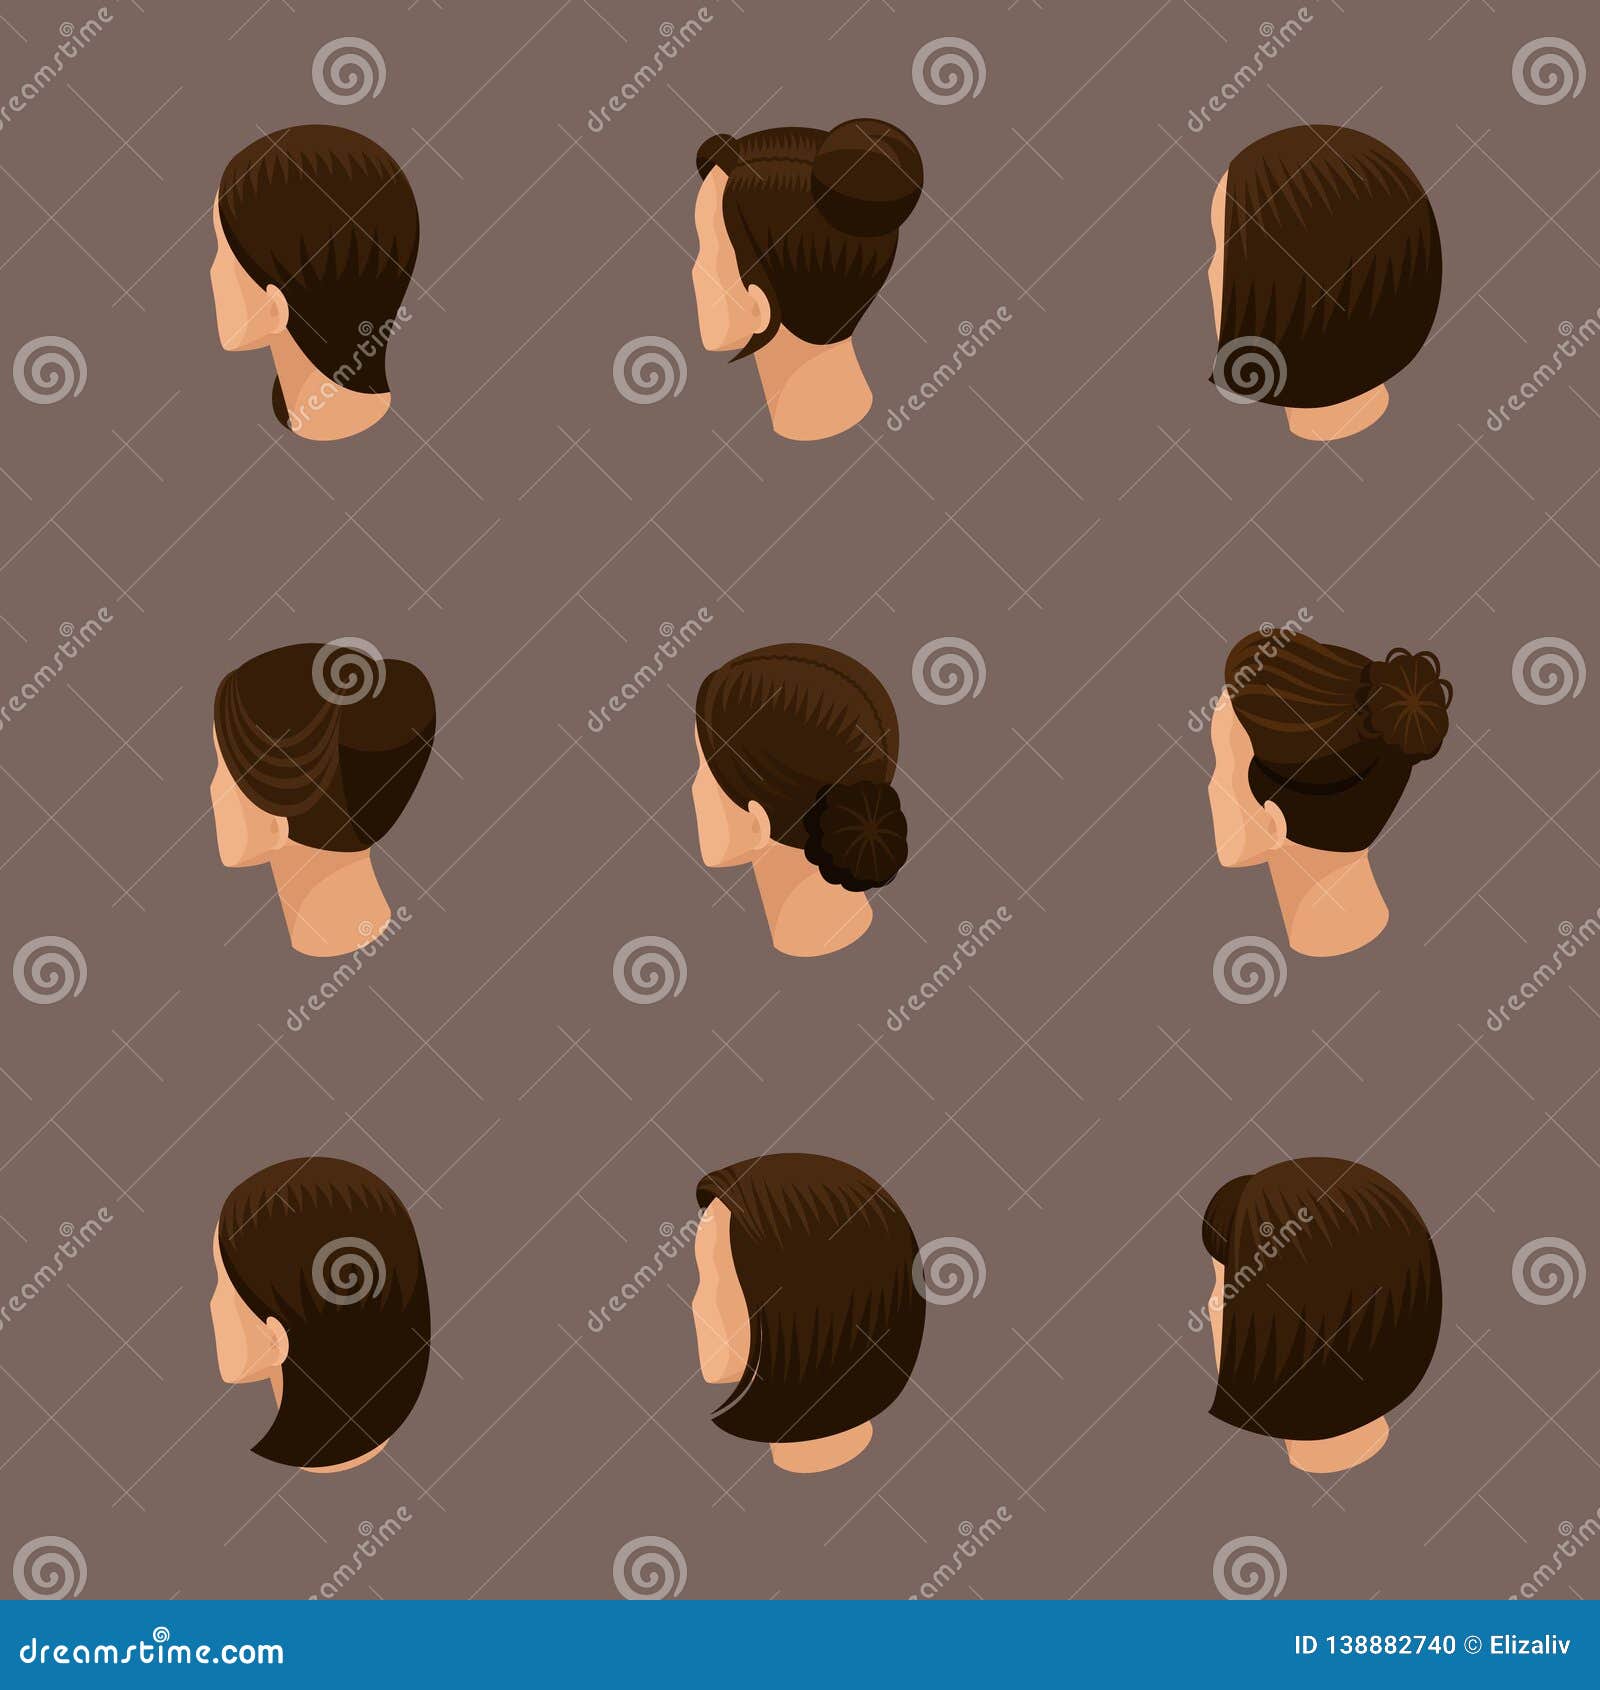 Hairstyle Gallery  Funky 3D Faces